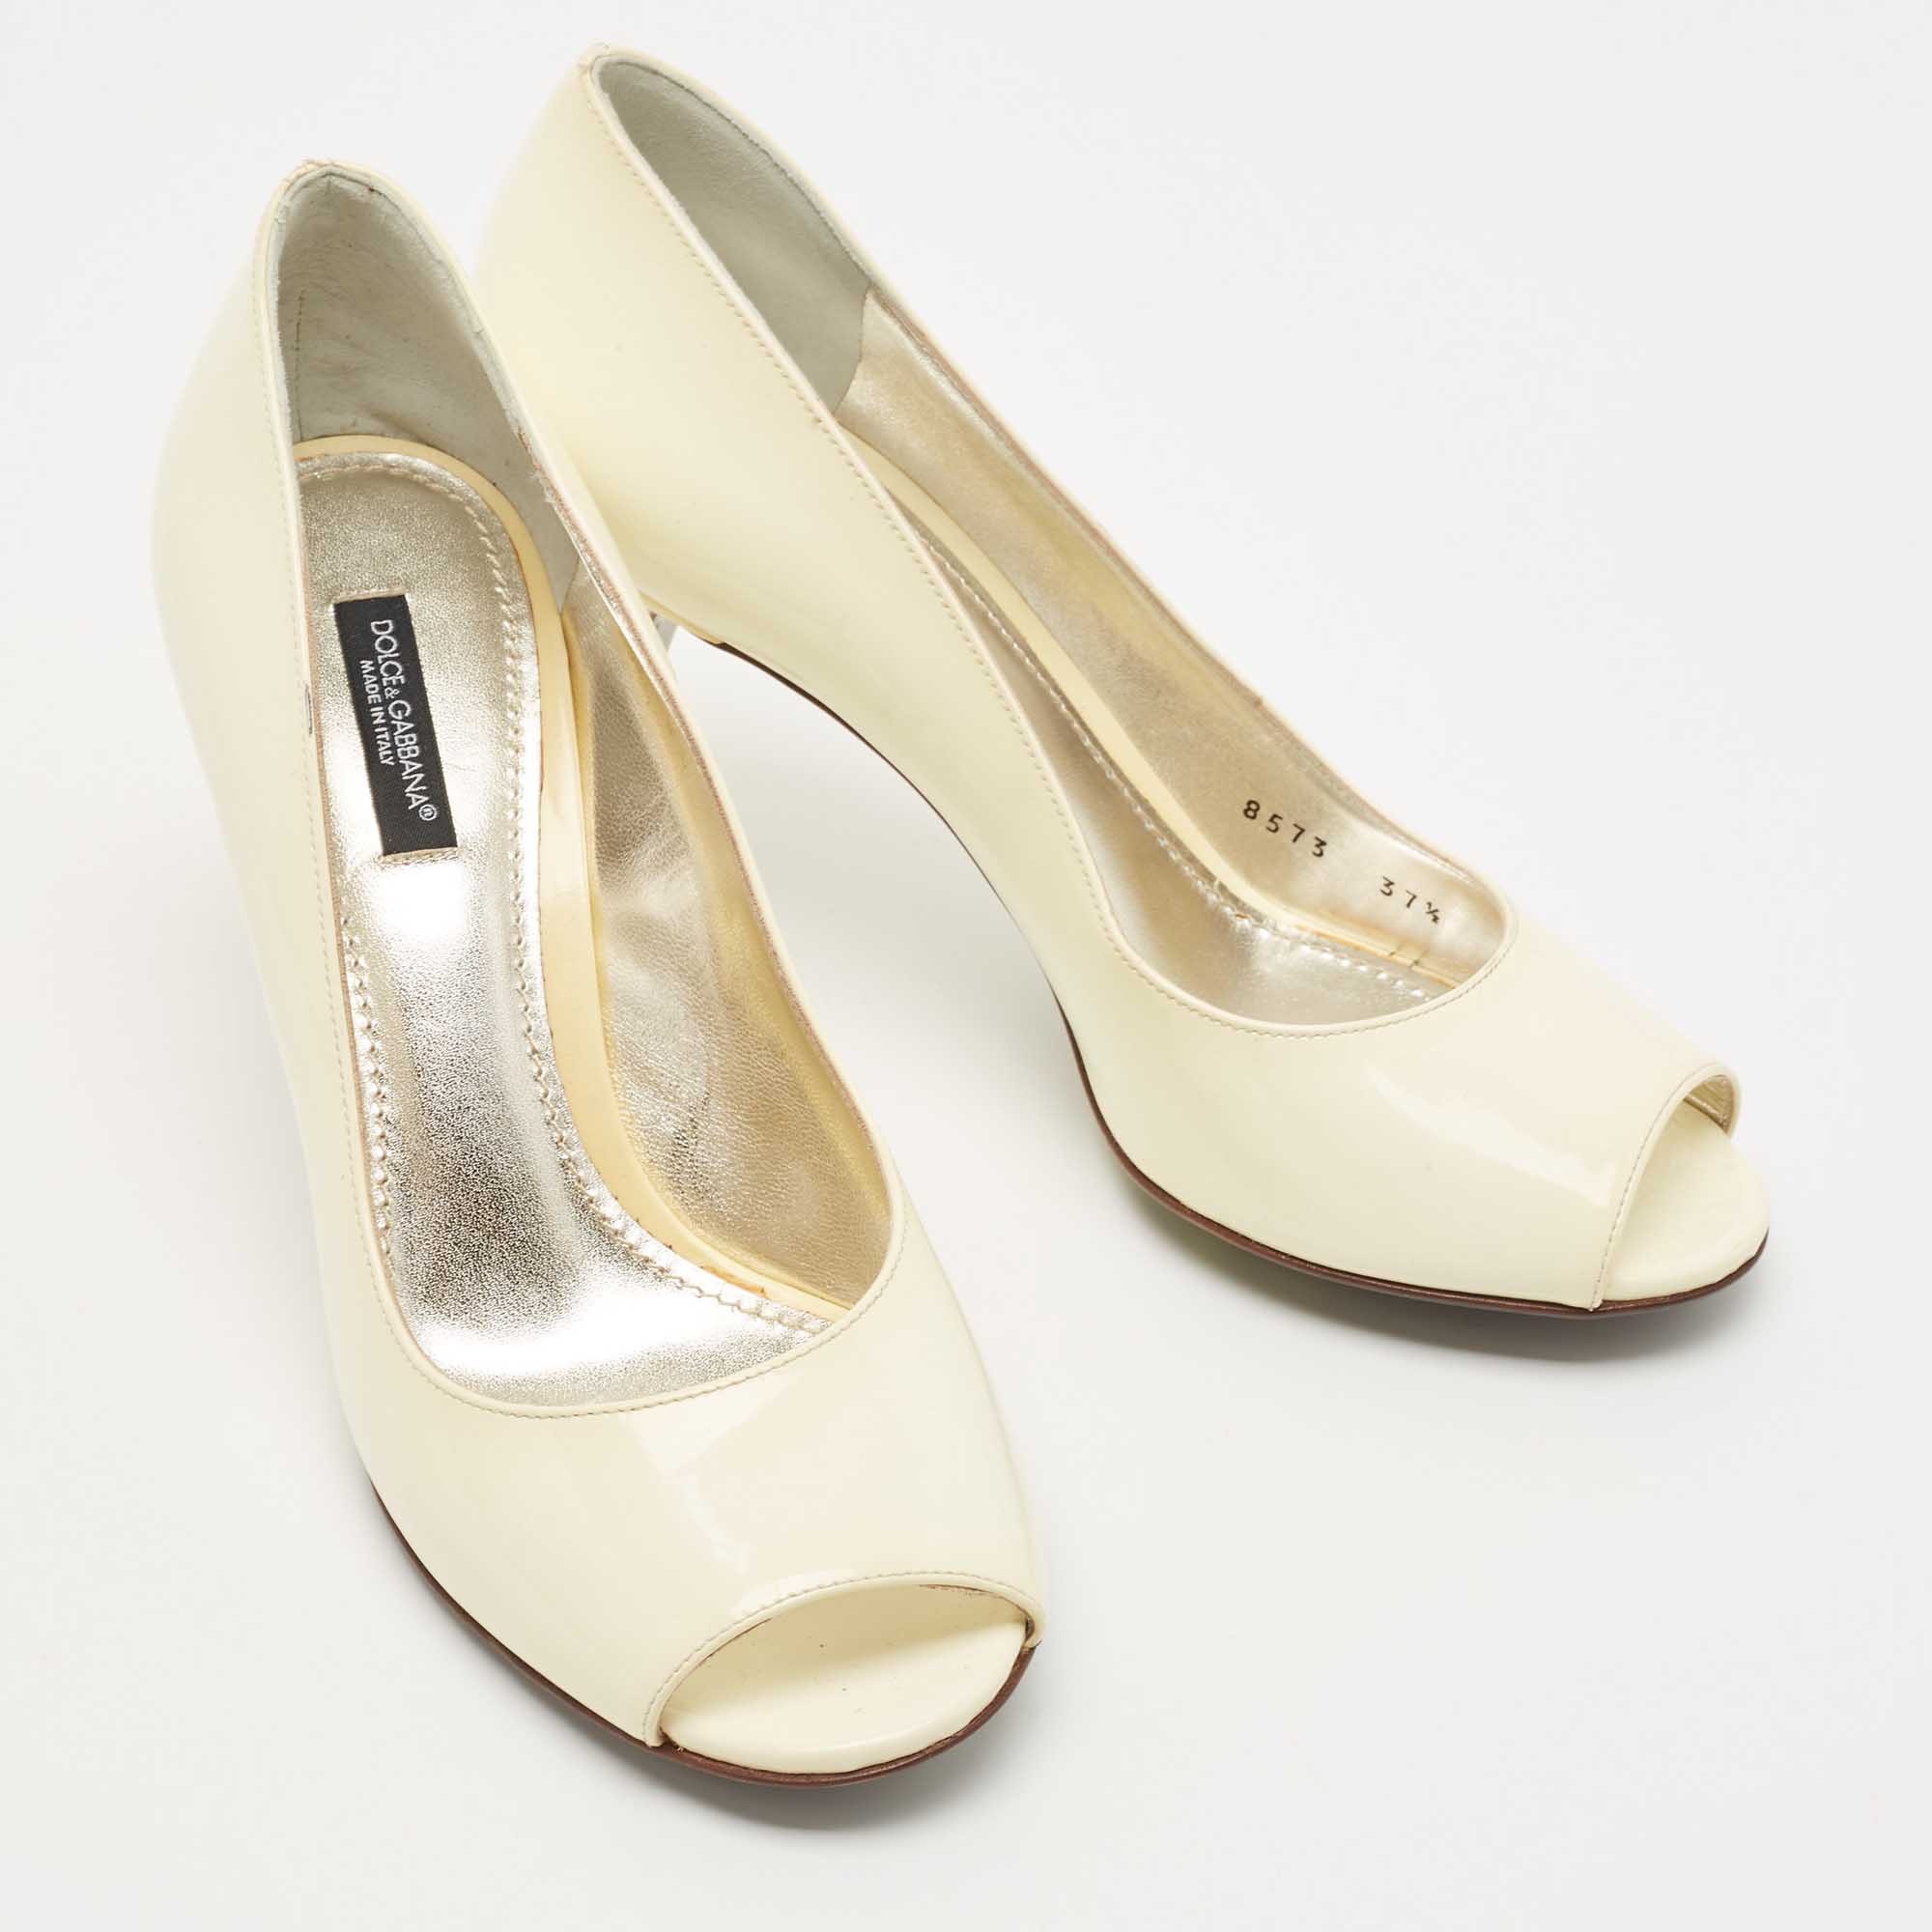 Dolce & Gabbana Off White Patent Leather Peep Toe Pumps Size 37.5